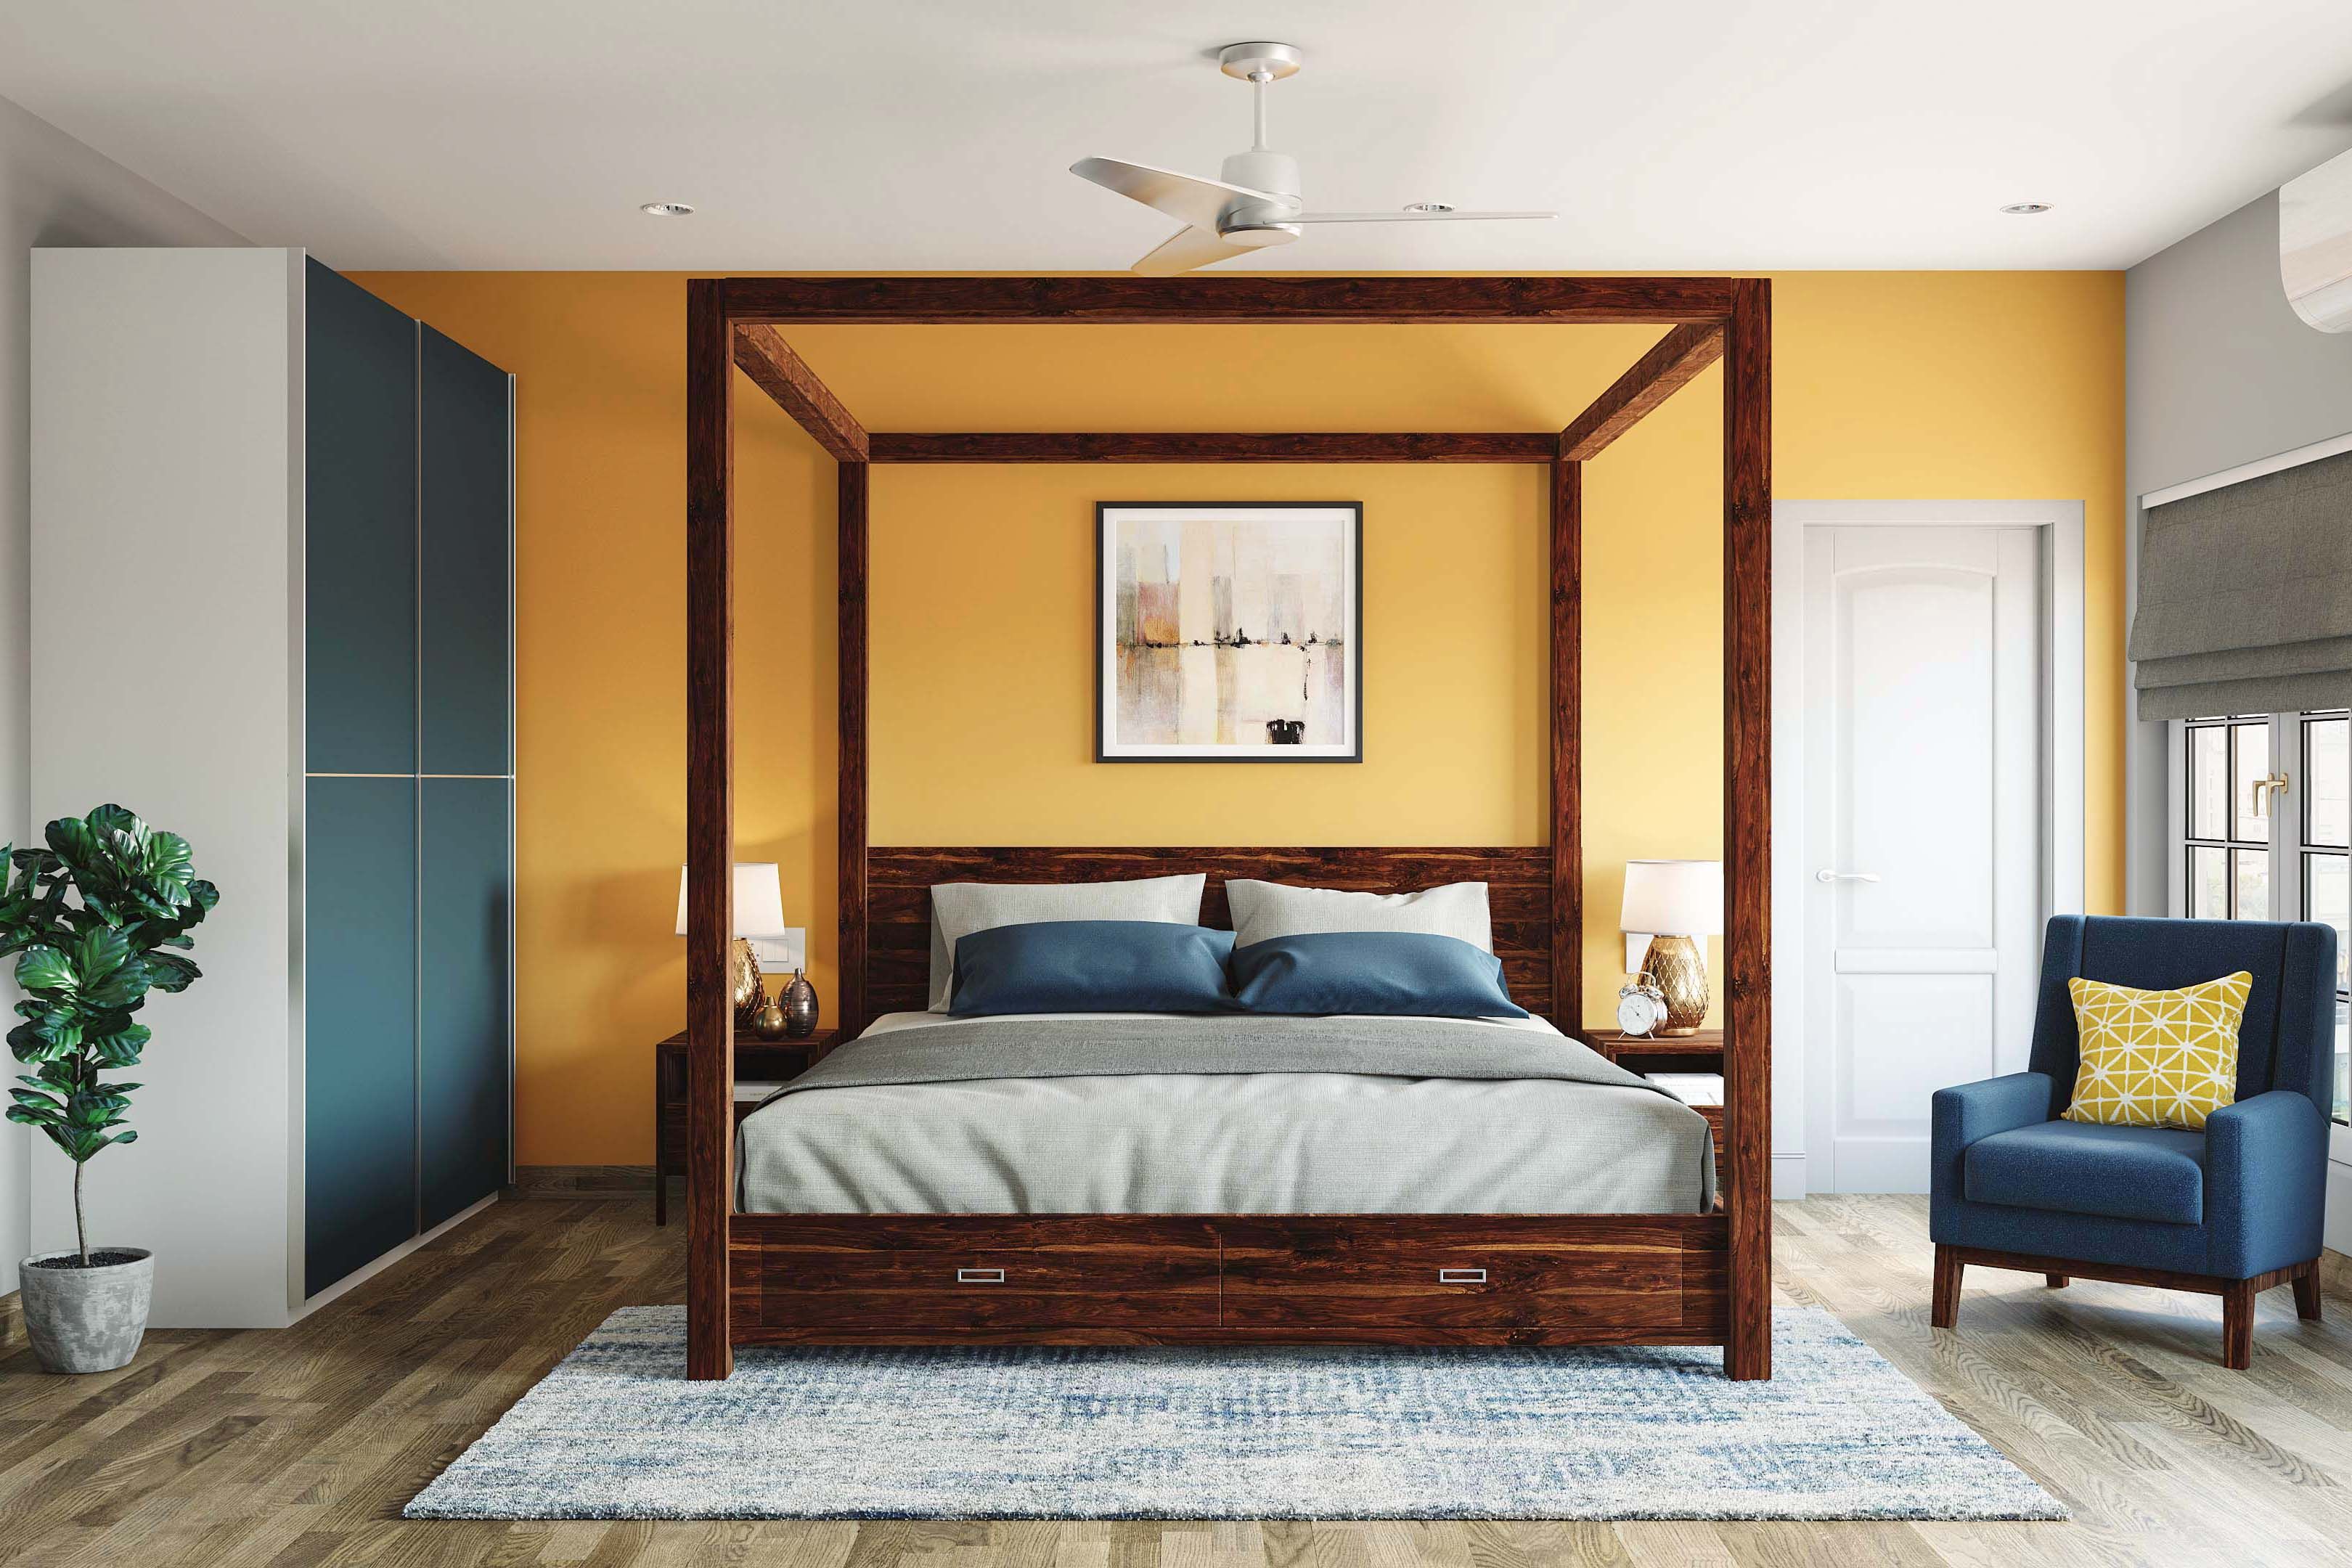 Contemporary Yellow Master Bedroom Design With 4-Poster Wooden Bed